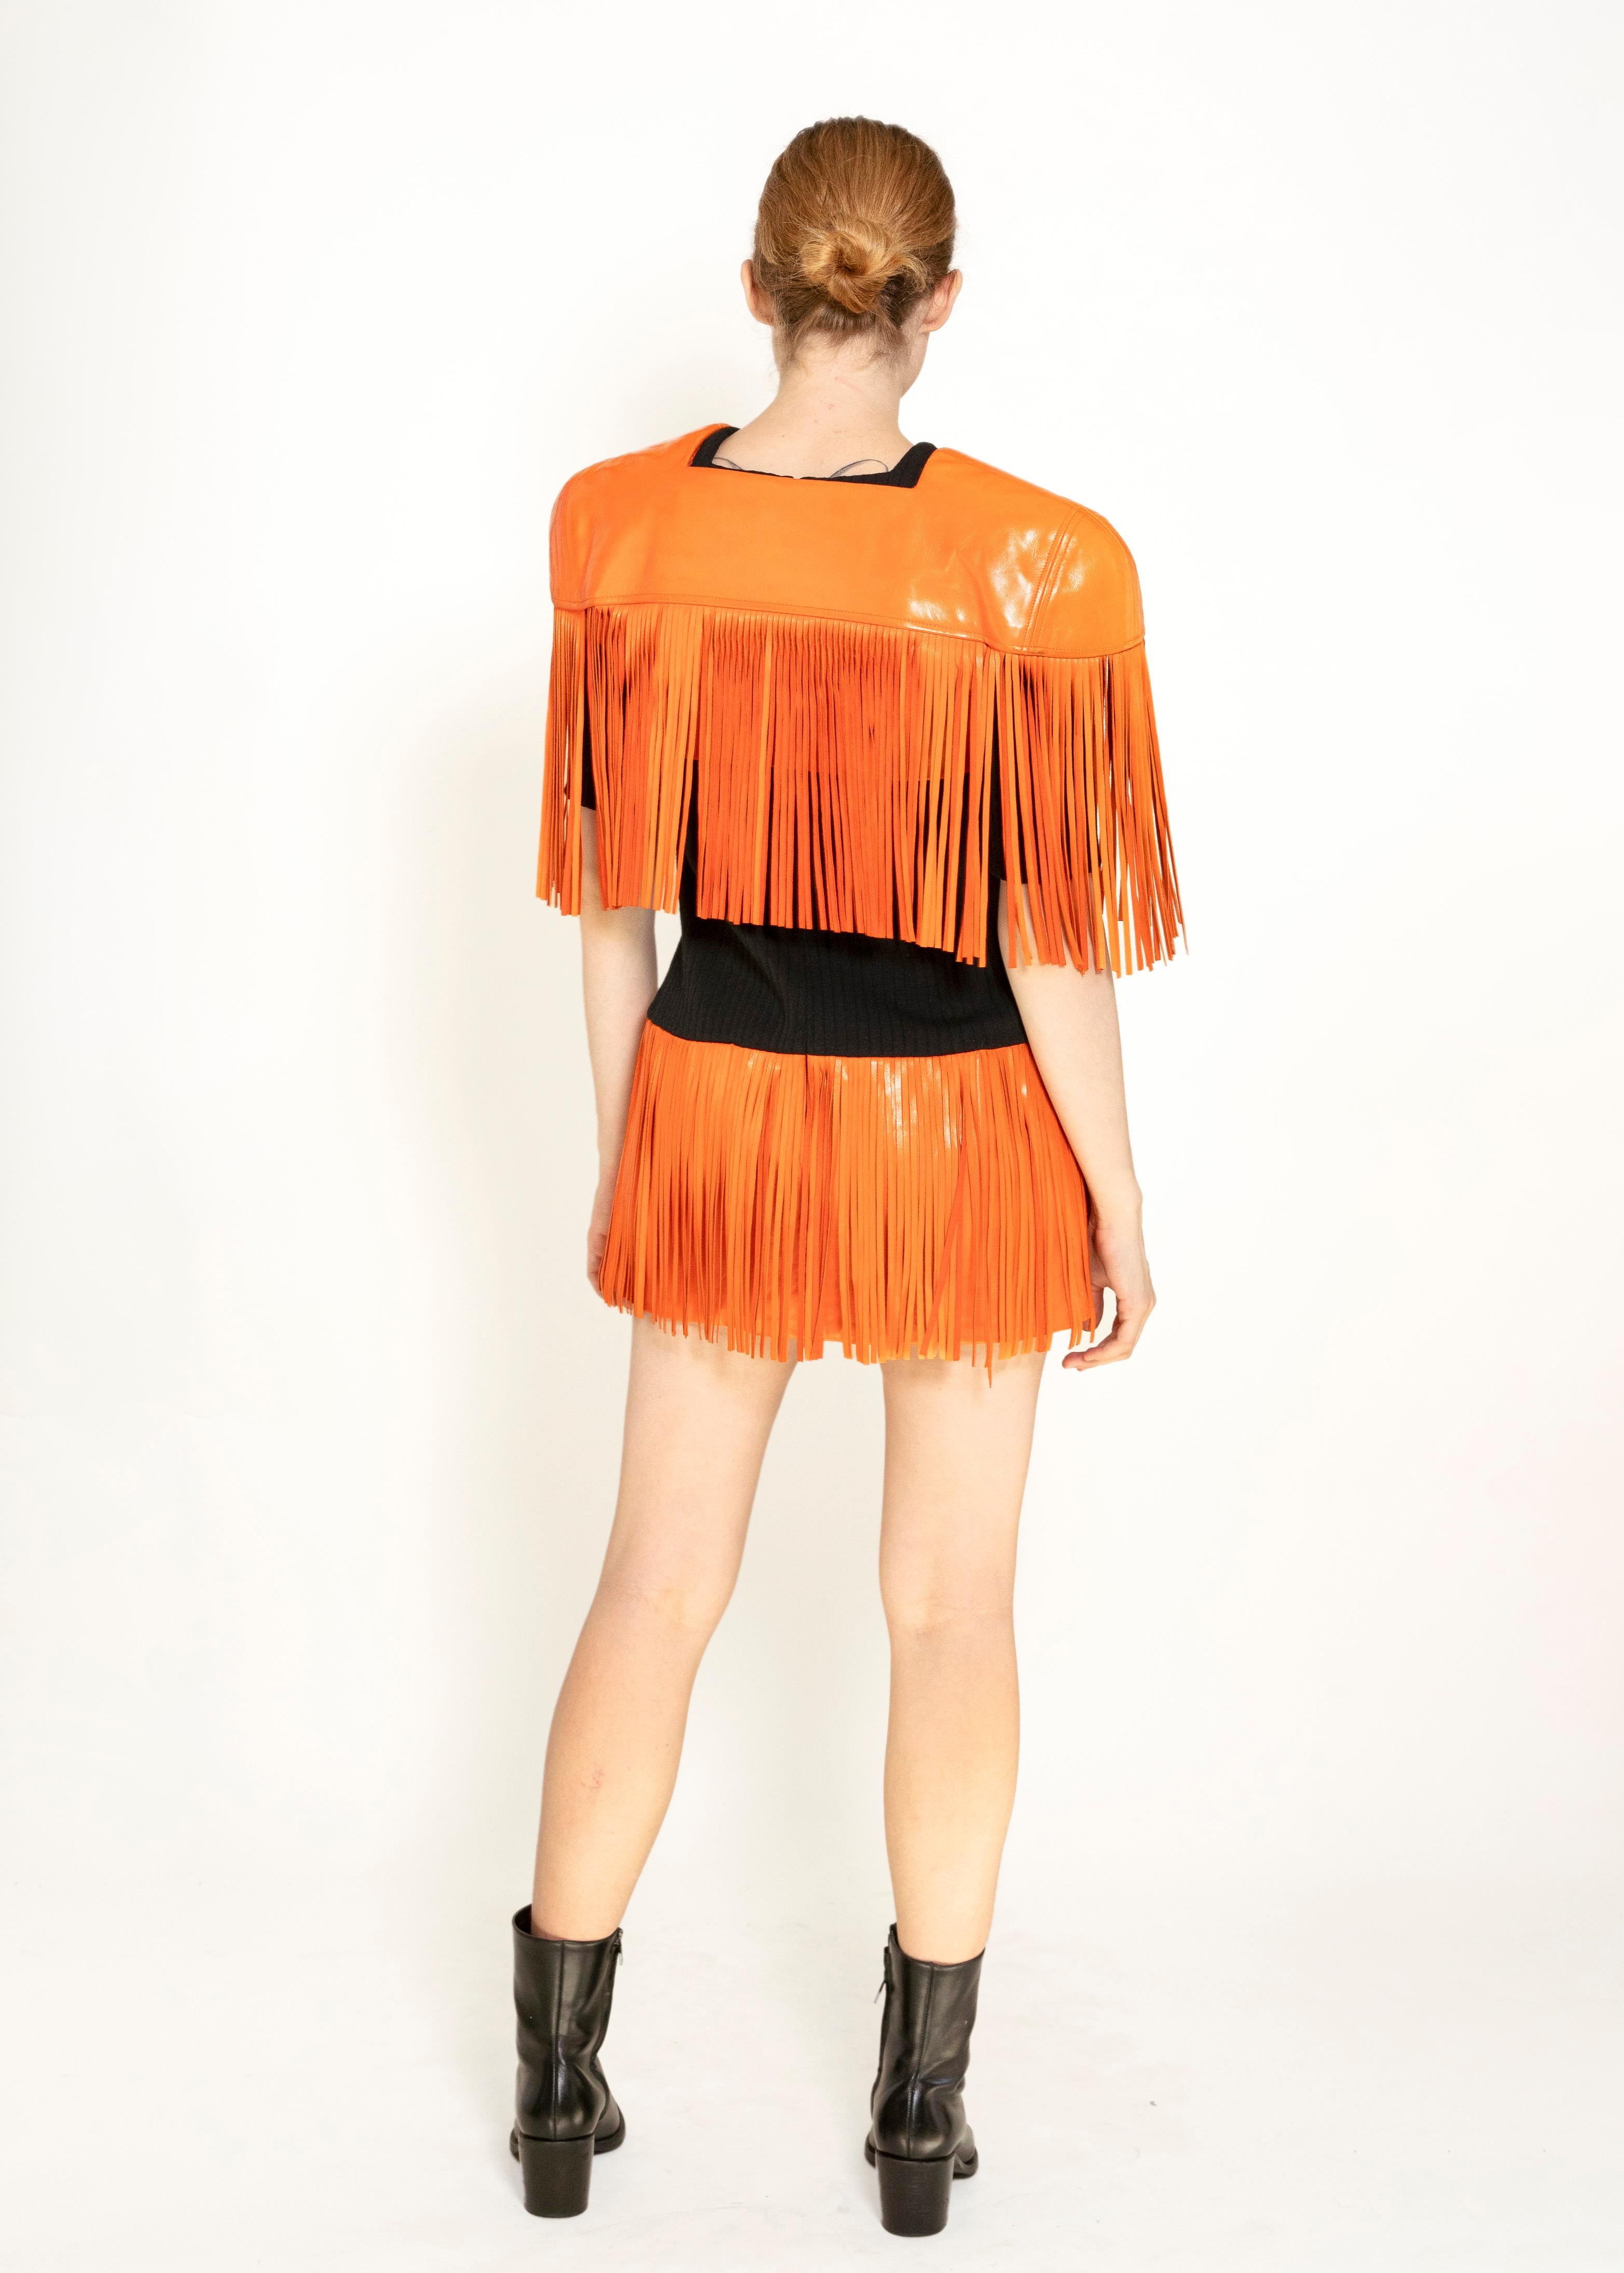 Paco Rabanne Leather Fringe Dress with Bolero In Excellent Condition For Sale In Los Angeles, CA